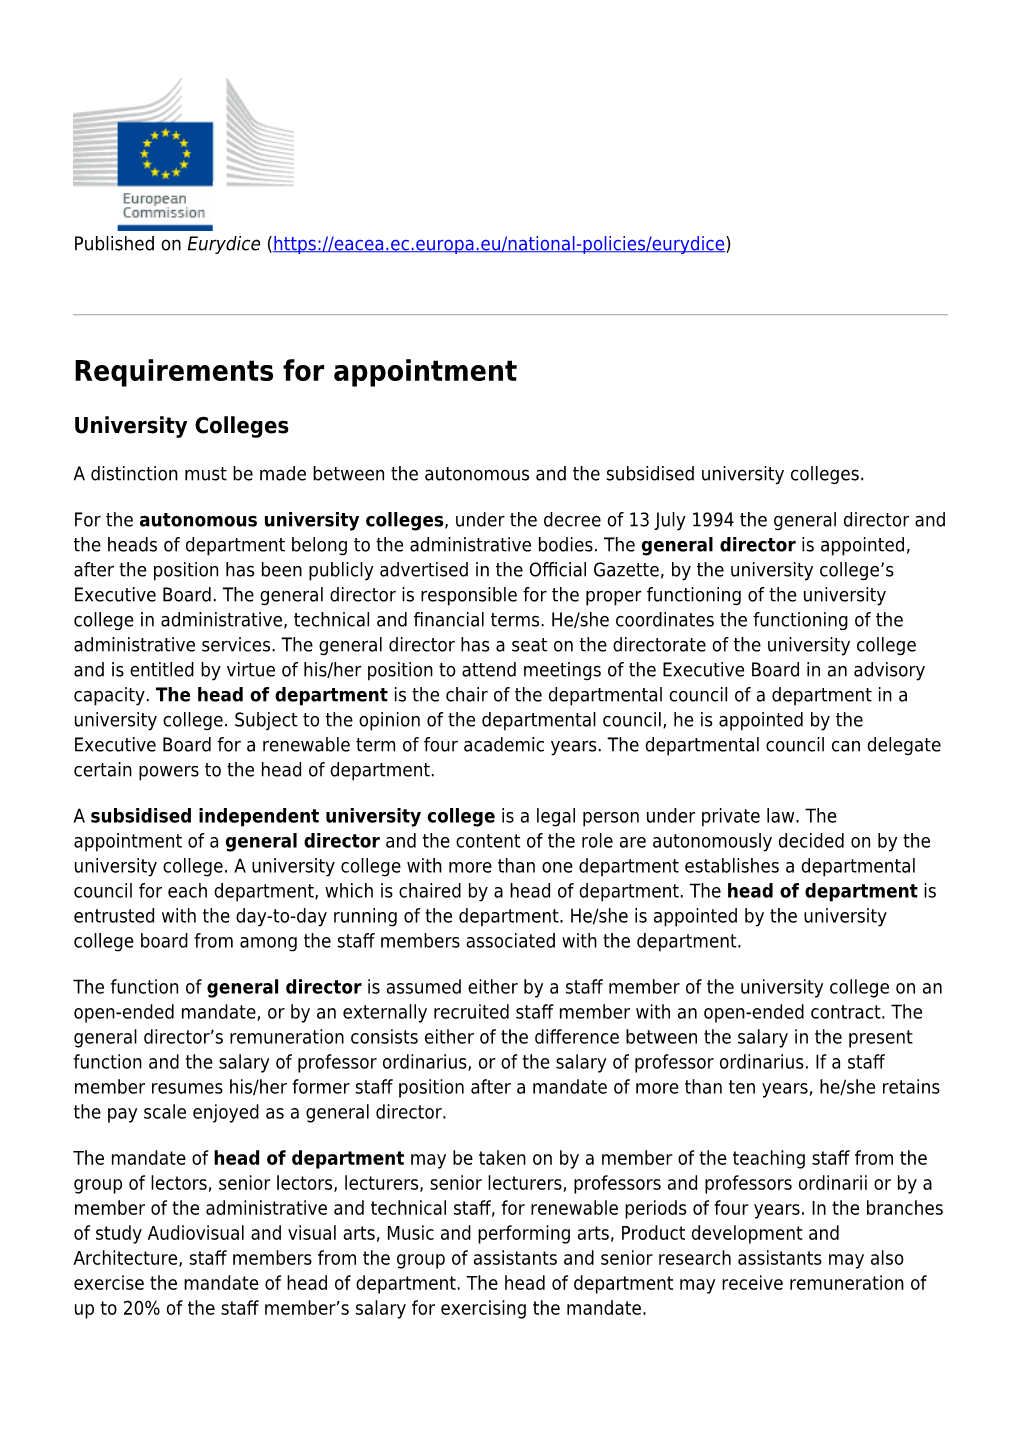 Requirements for Appointment